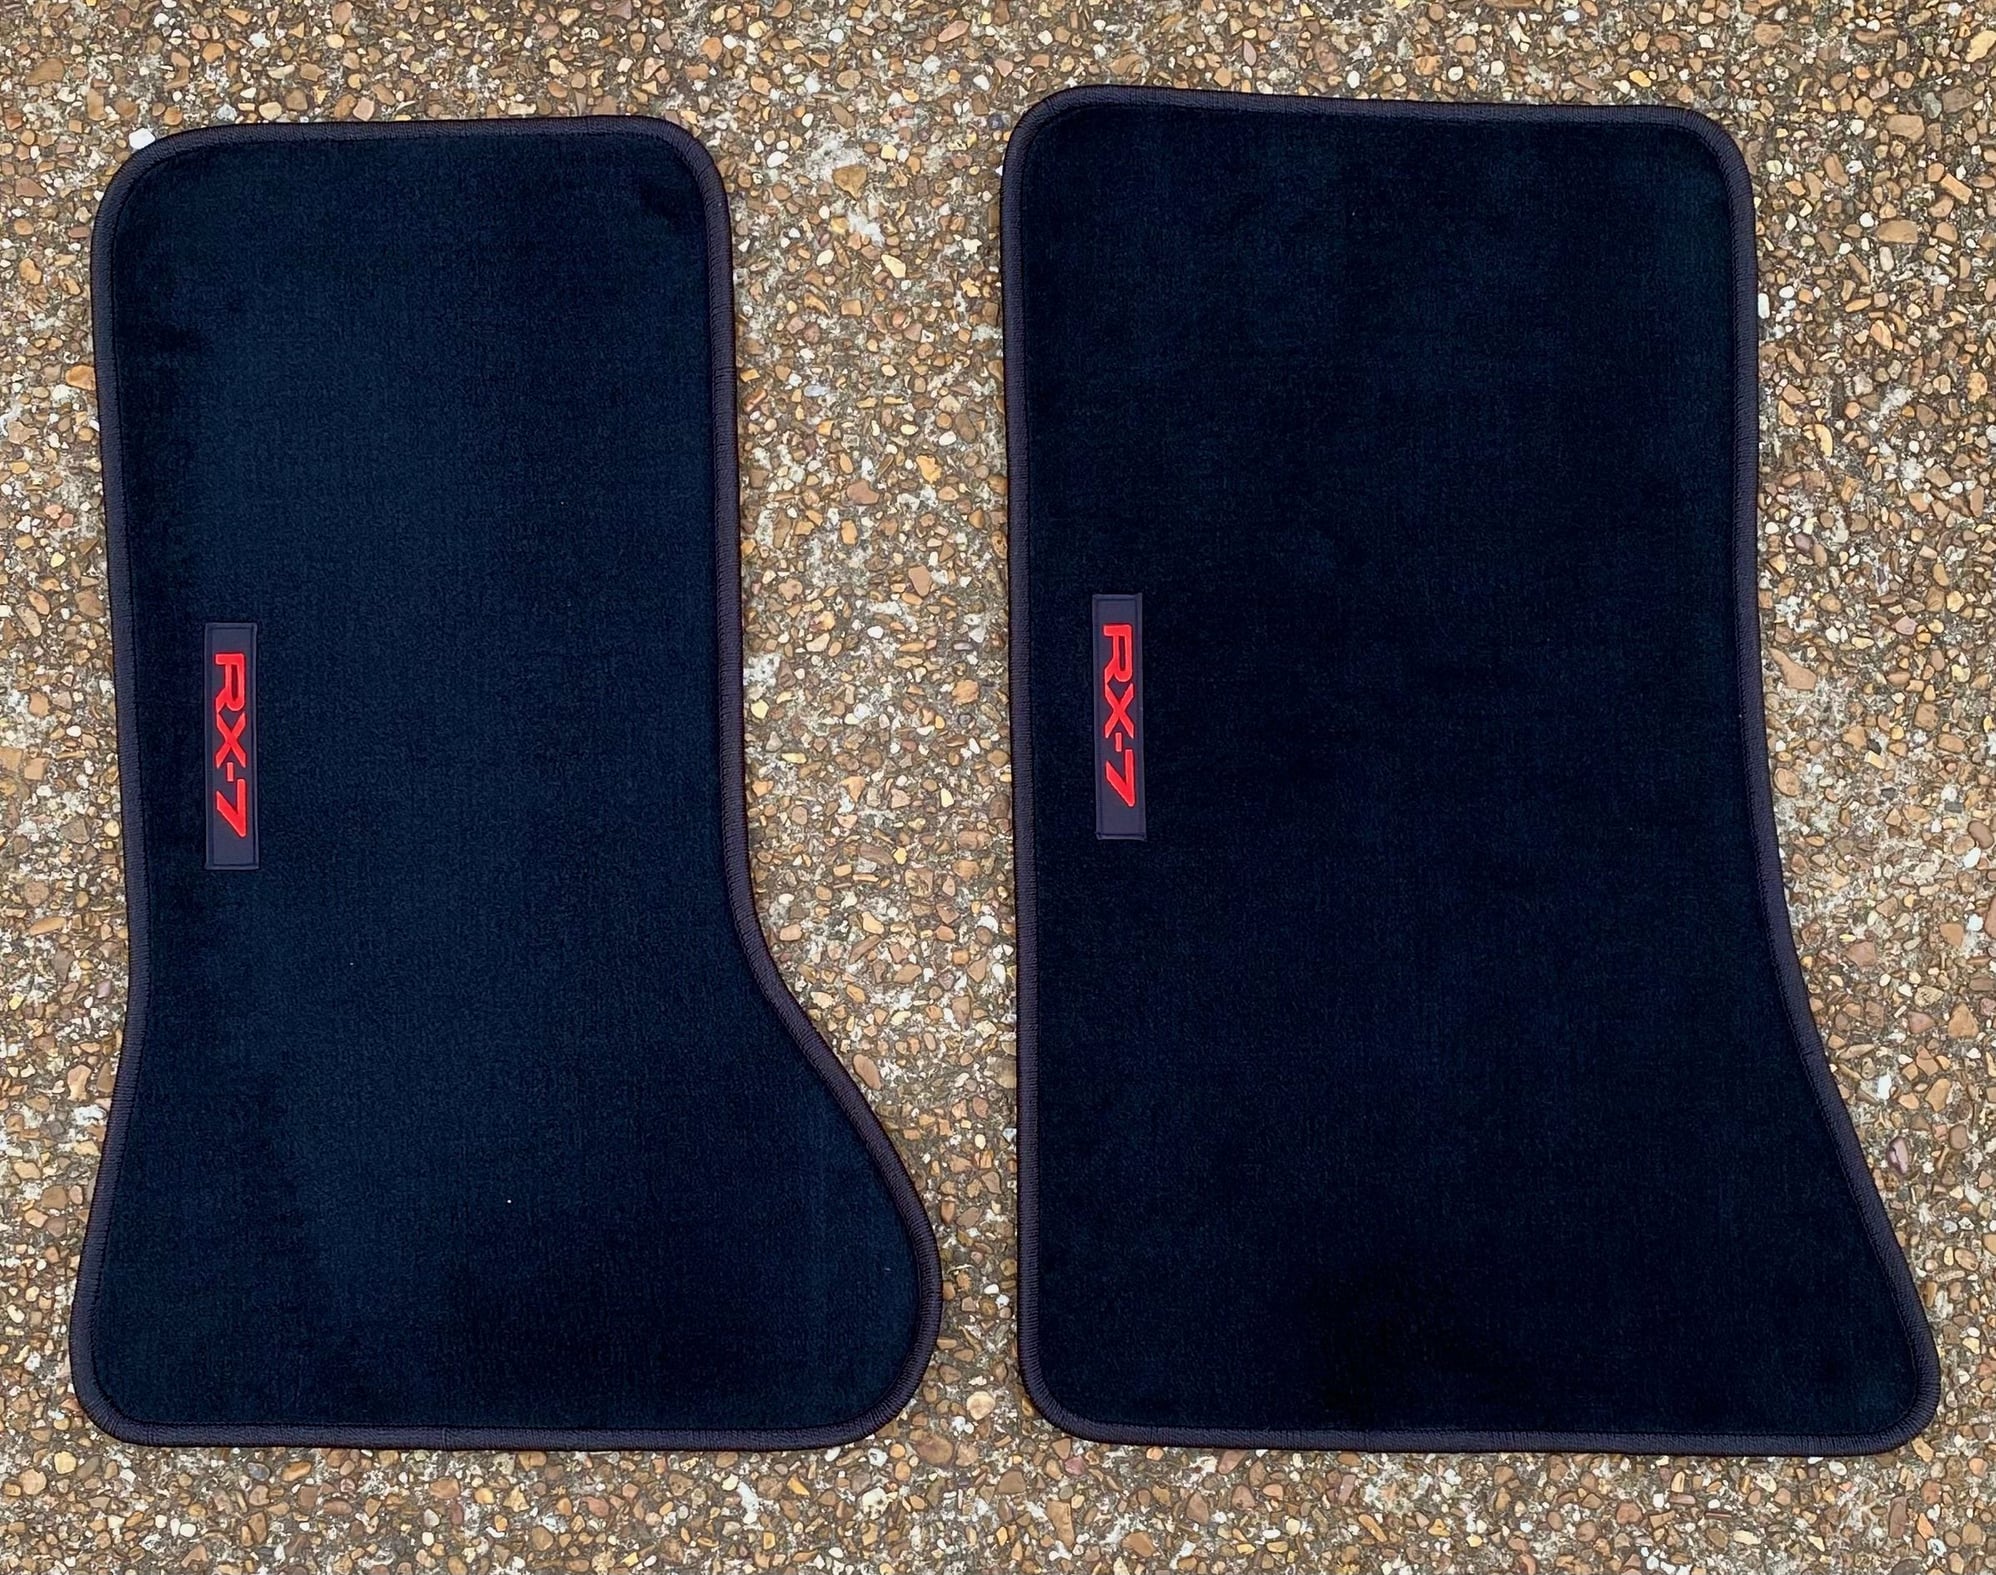 Interior/Upholstery - Nice 2nd gen floor mats - New - 1986 to 1991 Mazda RX-7 - Elkmont, AL 35620, United States